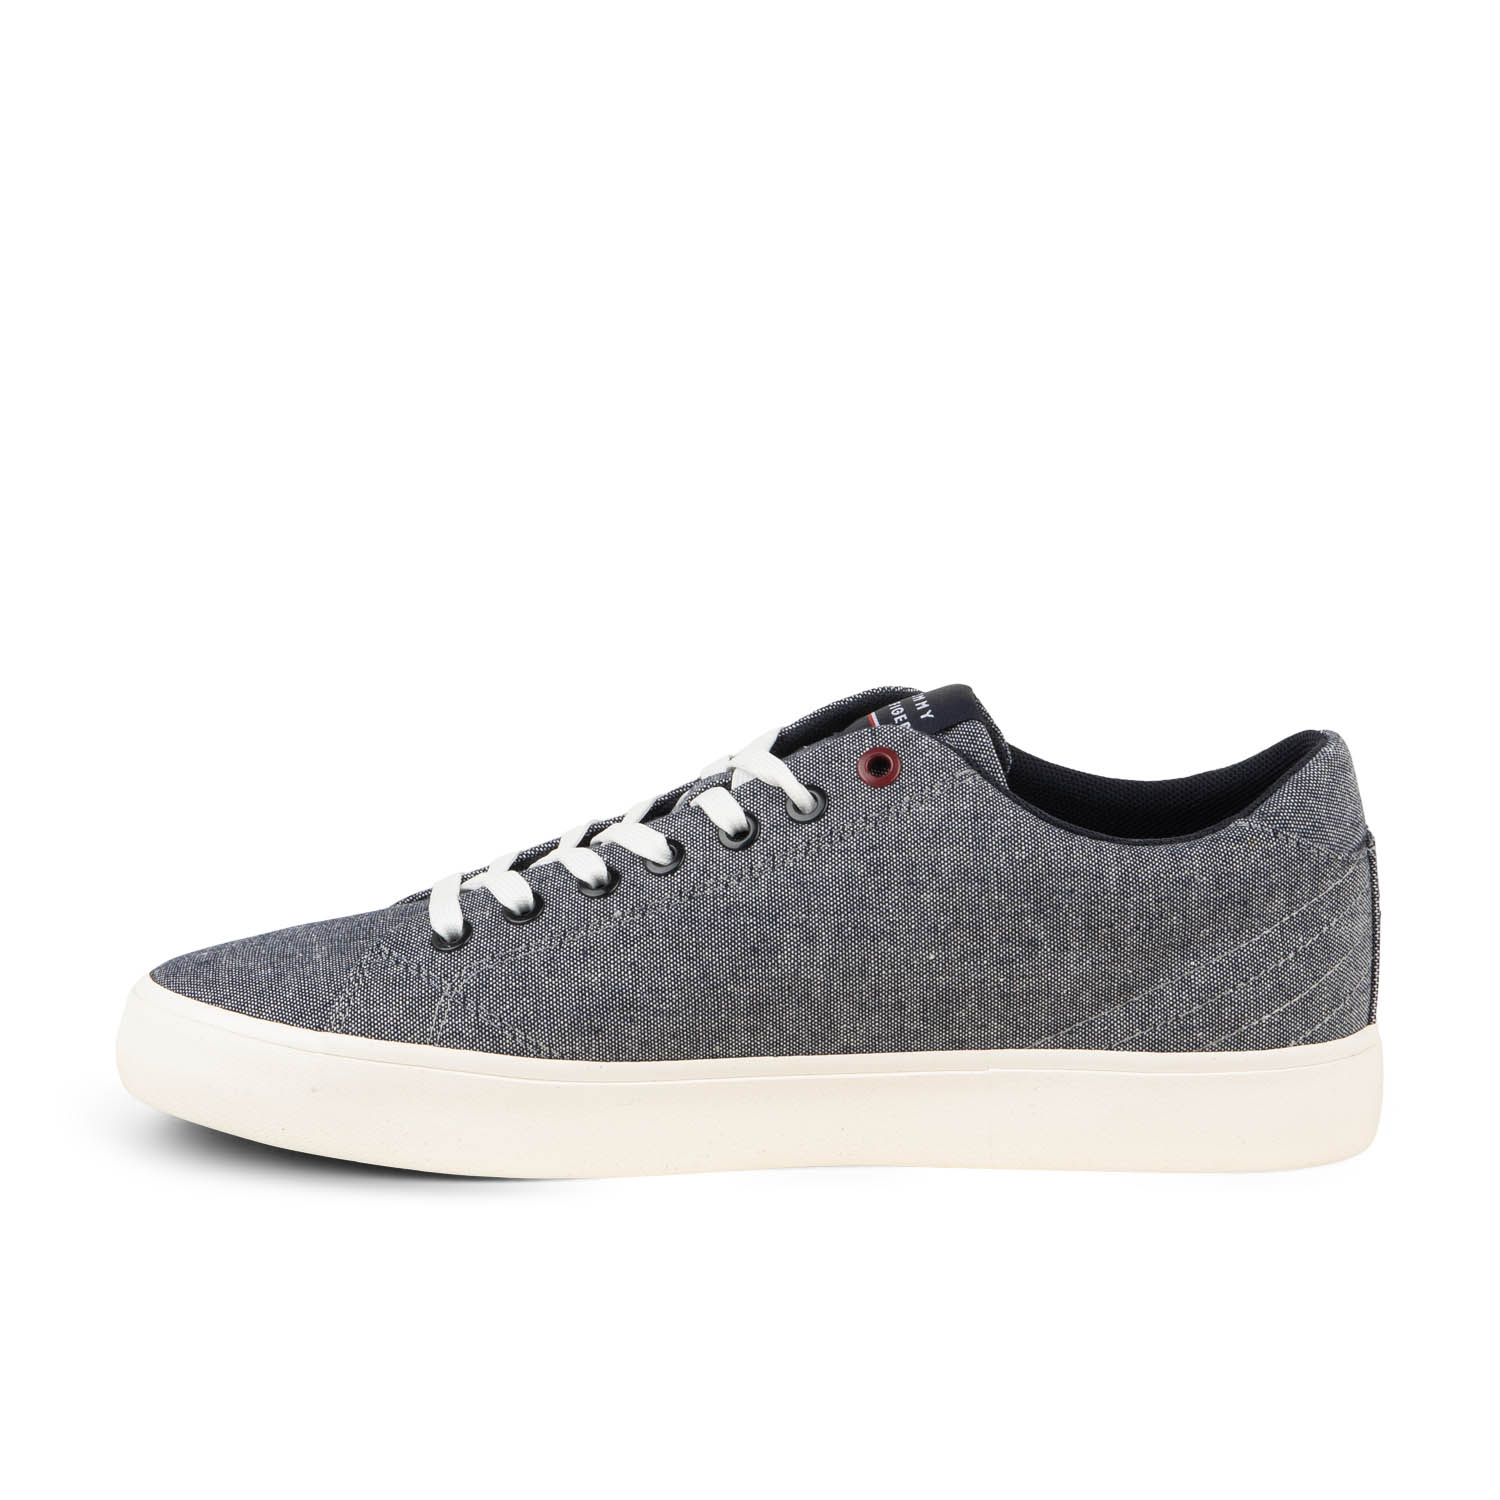 04 - CORE LOW CHAMBRAY - TOMMY HILFIGER - Baskets - Textile